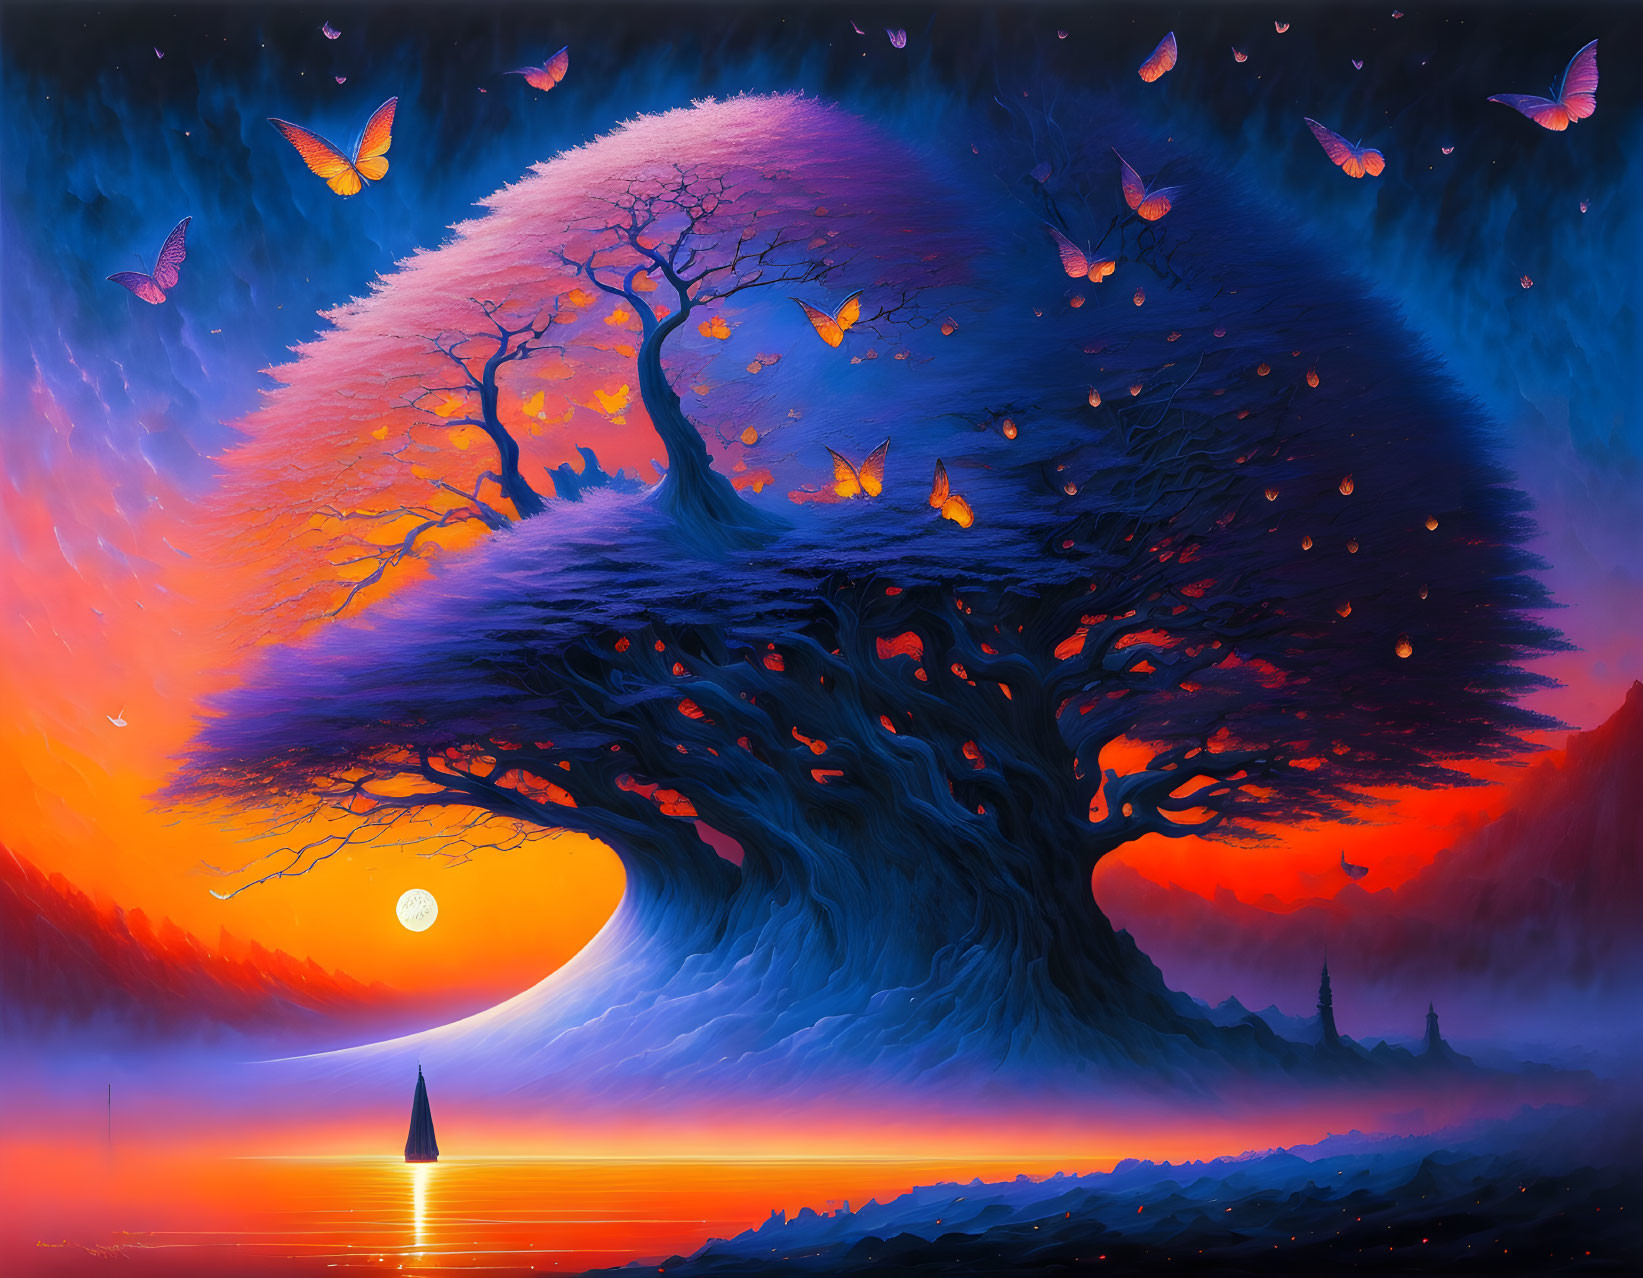 Colorful painting of giant tree, butterflies, sunset sky, and sailboat on calm sea